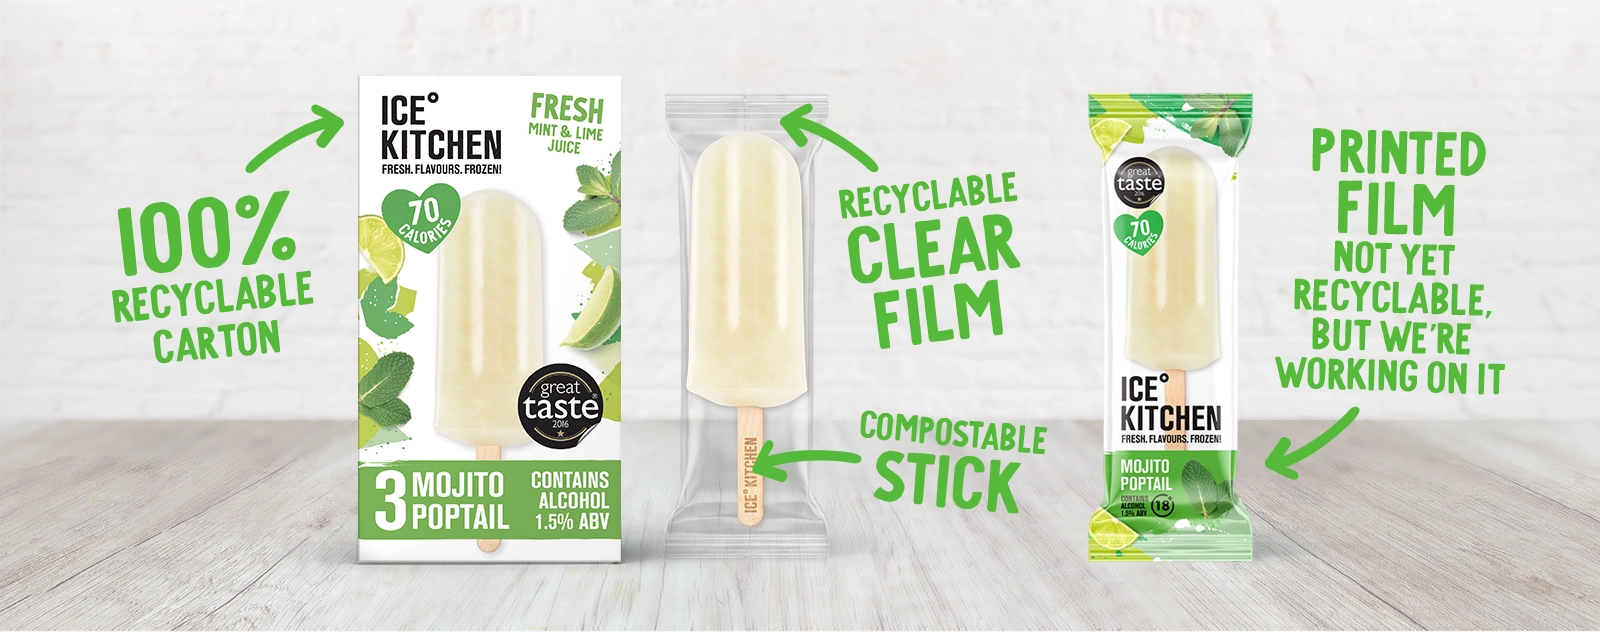 Banner showing packaging for Mojito Poptail ice lolly where the carton is 100% recyclable, the clear film is recyclable and the stick is compostable